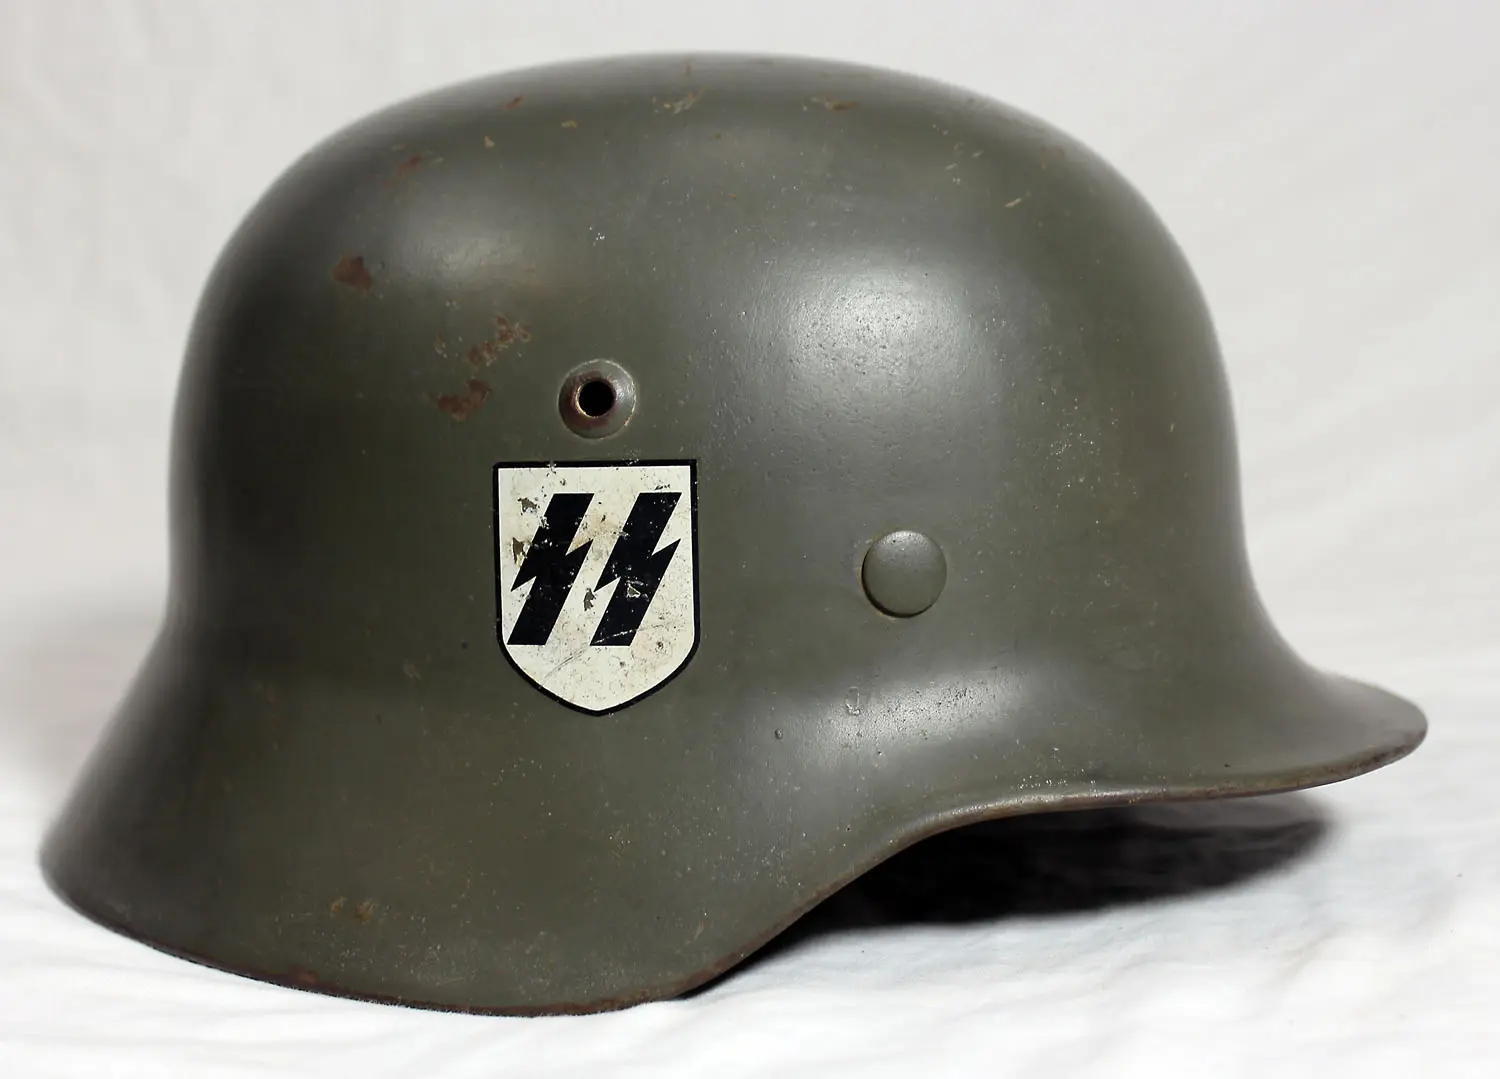 A german helmet with the symbol for ' waffen ss '.